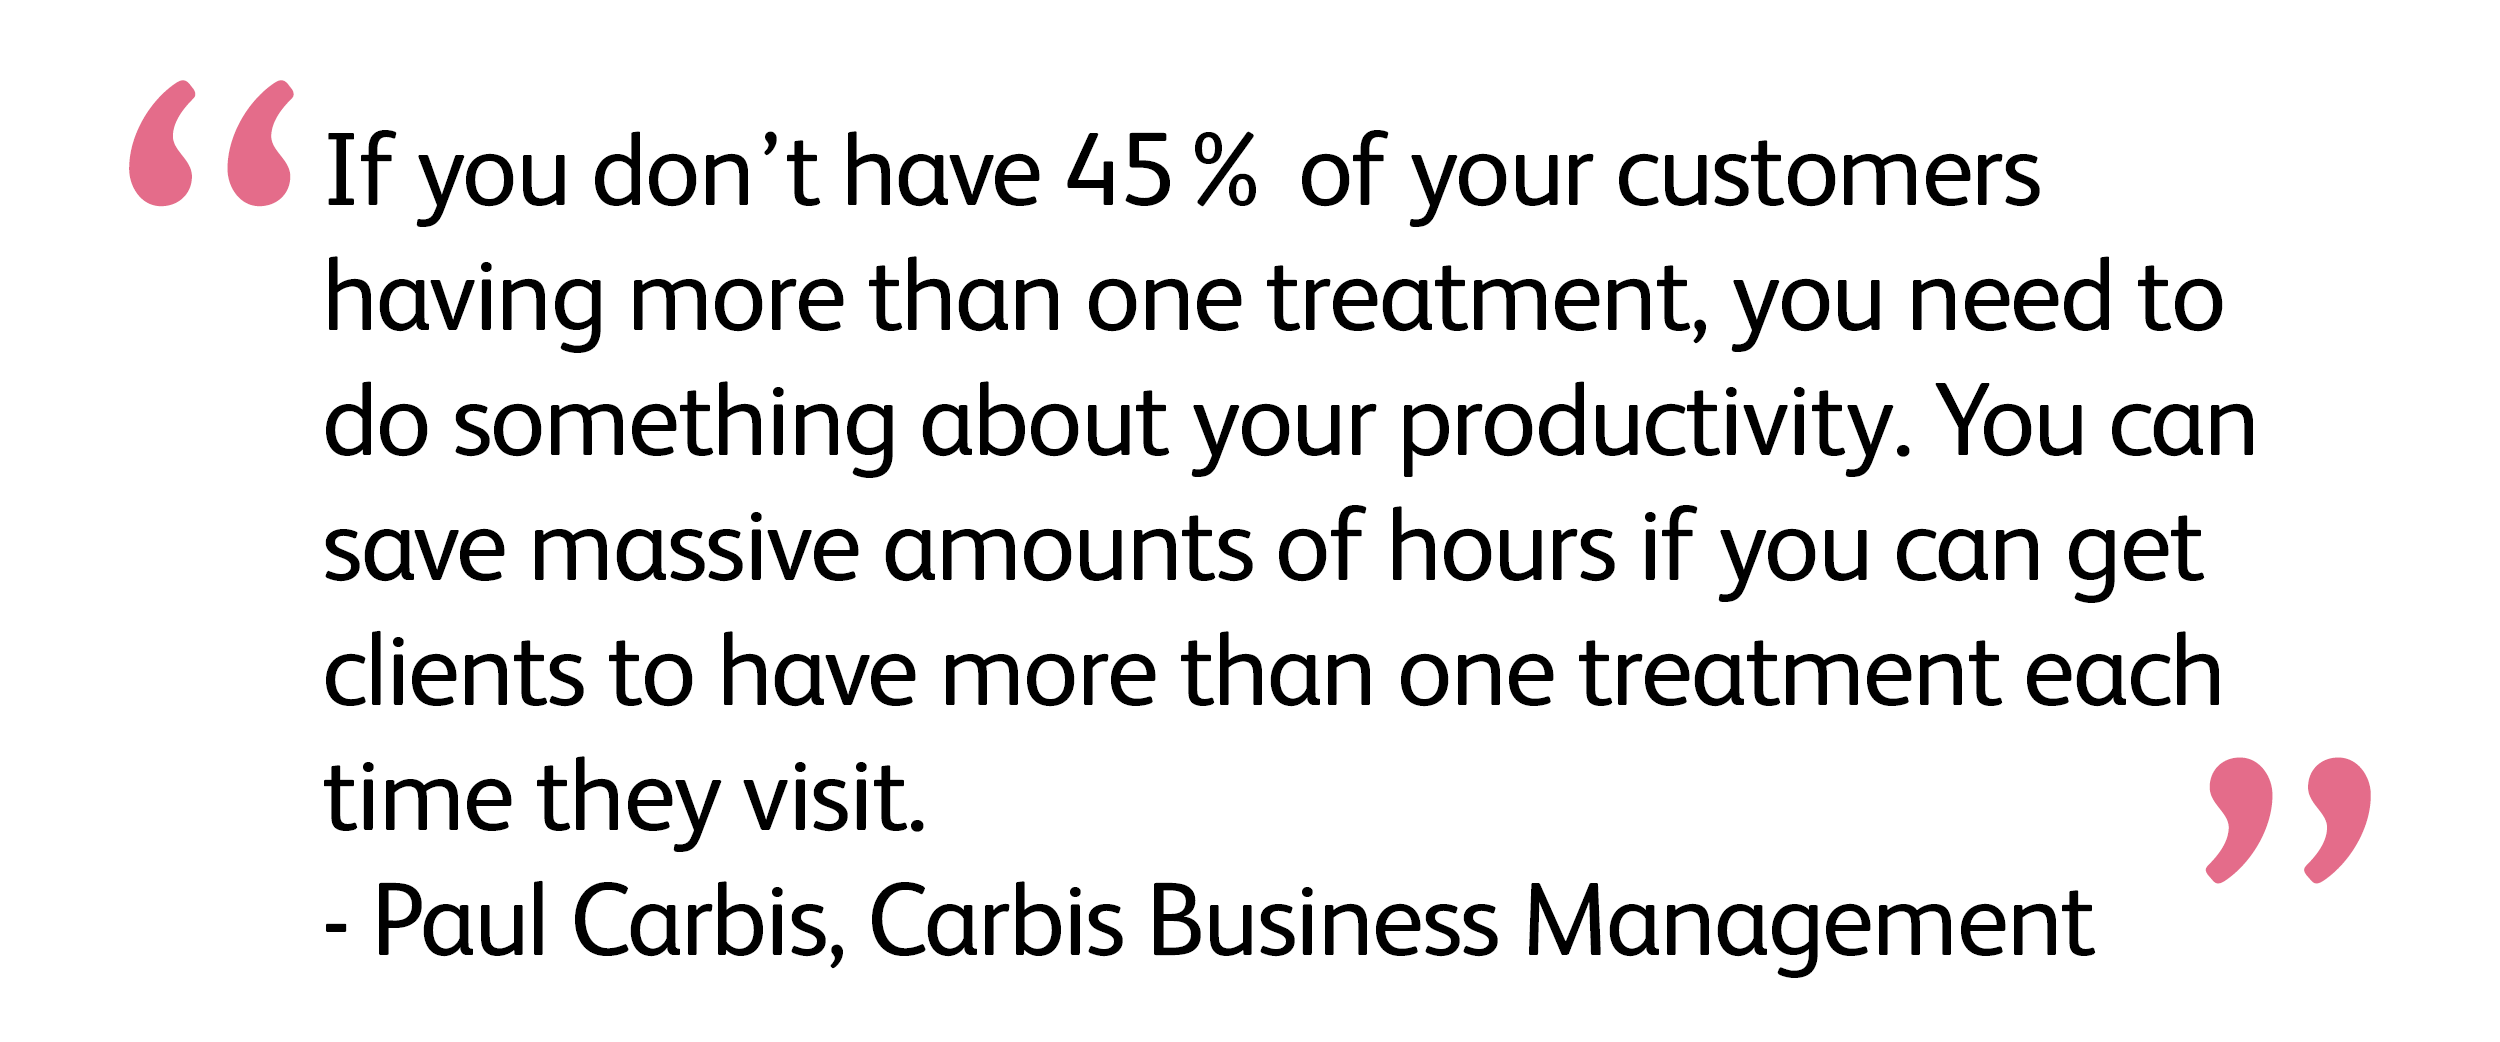 “If you don’t have 45% of your customers having more than one treatment, you need to do something about your productivity. You can save massive amounts of hours if you can get clients to have more than one treatment each time they visit.” Paul Carbis, Carbis Business Management. 